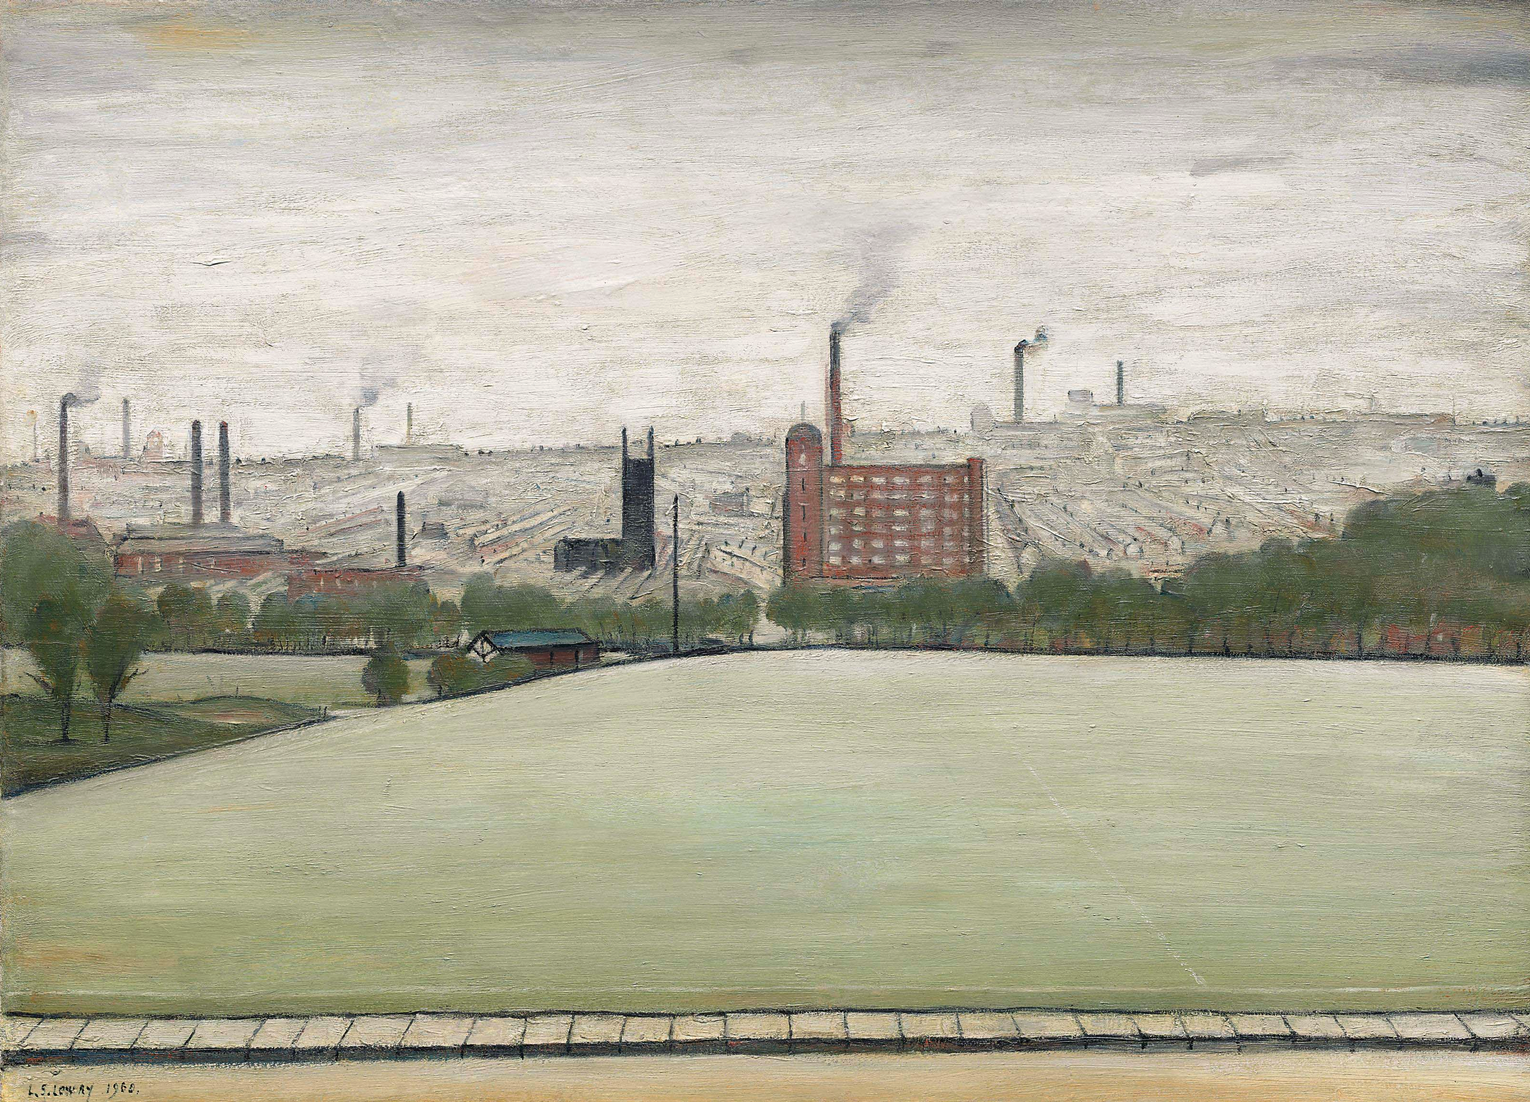 Bolton landscape (1960) by Laurence Stephen Lowry (1887 - 1976), English artist.